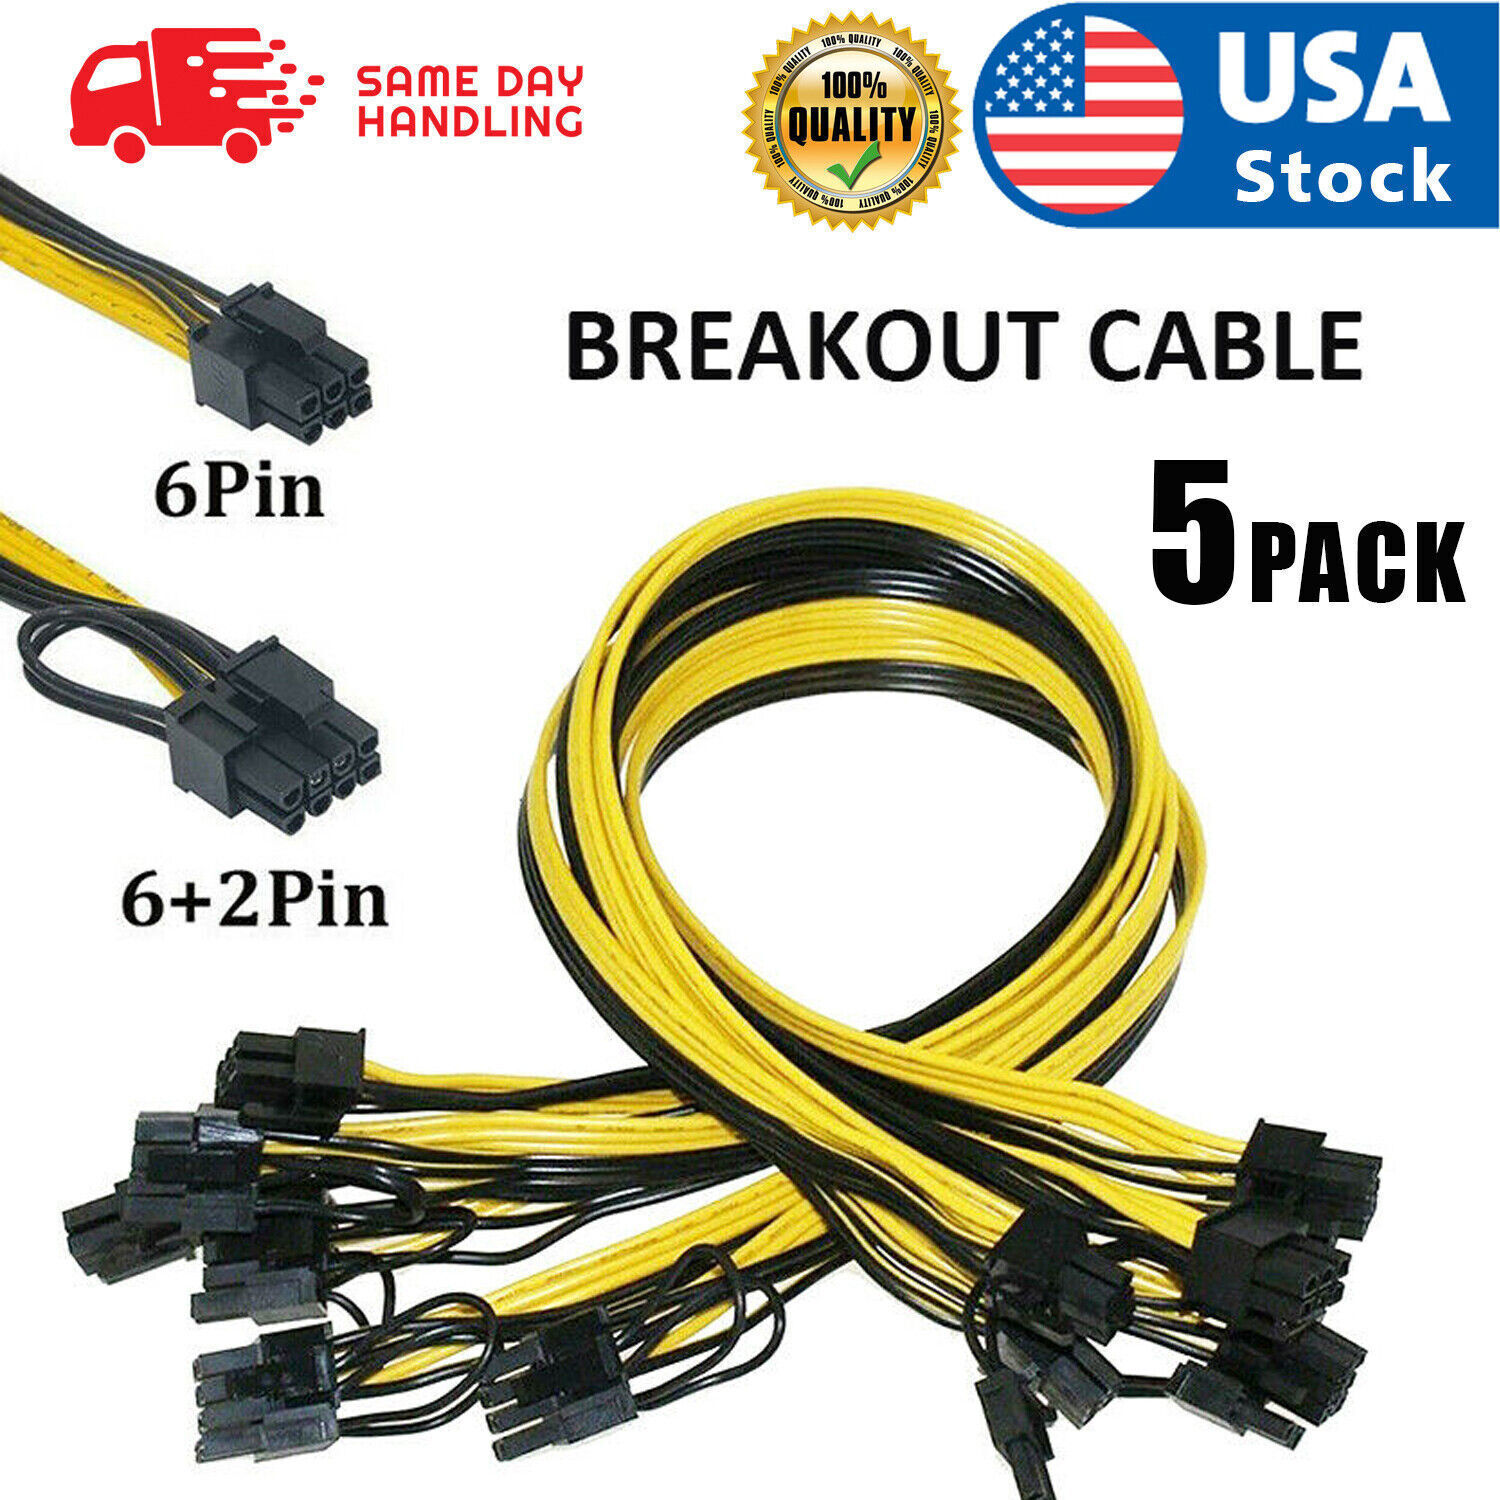 5PCS / 10PCS 50cm Breakout Cable 6 pin to 8 pin (6+2) PCIE Cable 18AWG Mining US